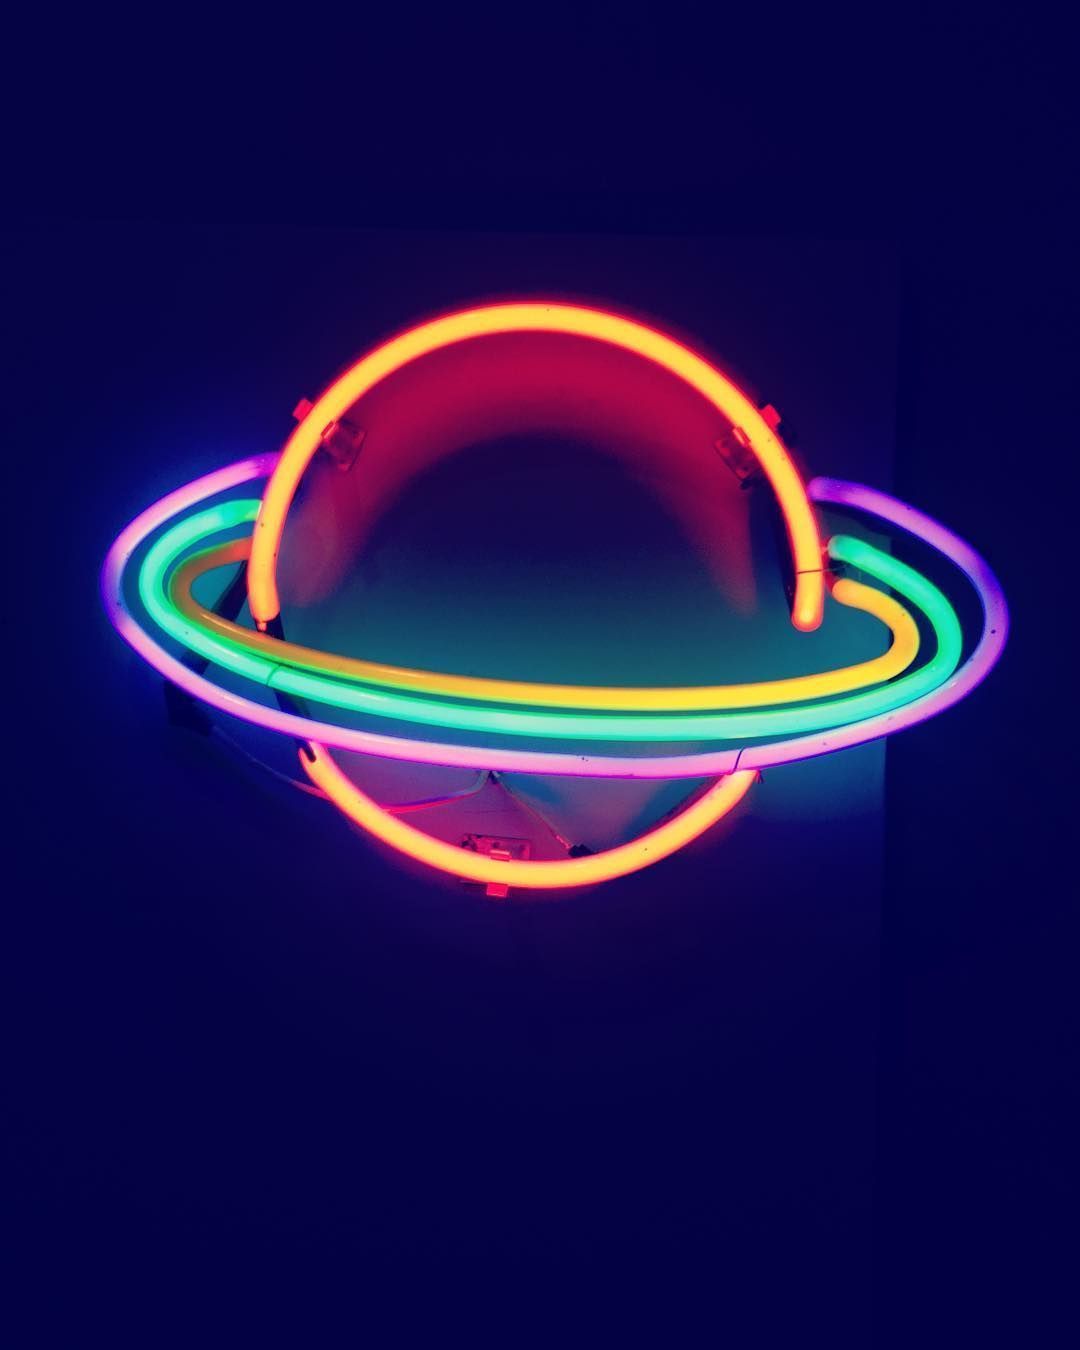 Aesthetic Room Bedrooms Neon #aesthetic #aestheticallypleasing #chillvibes. Neon signs, Neon lights for rooms, Neon light signs